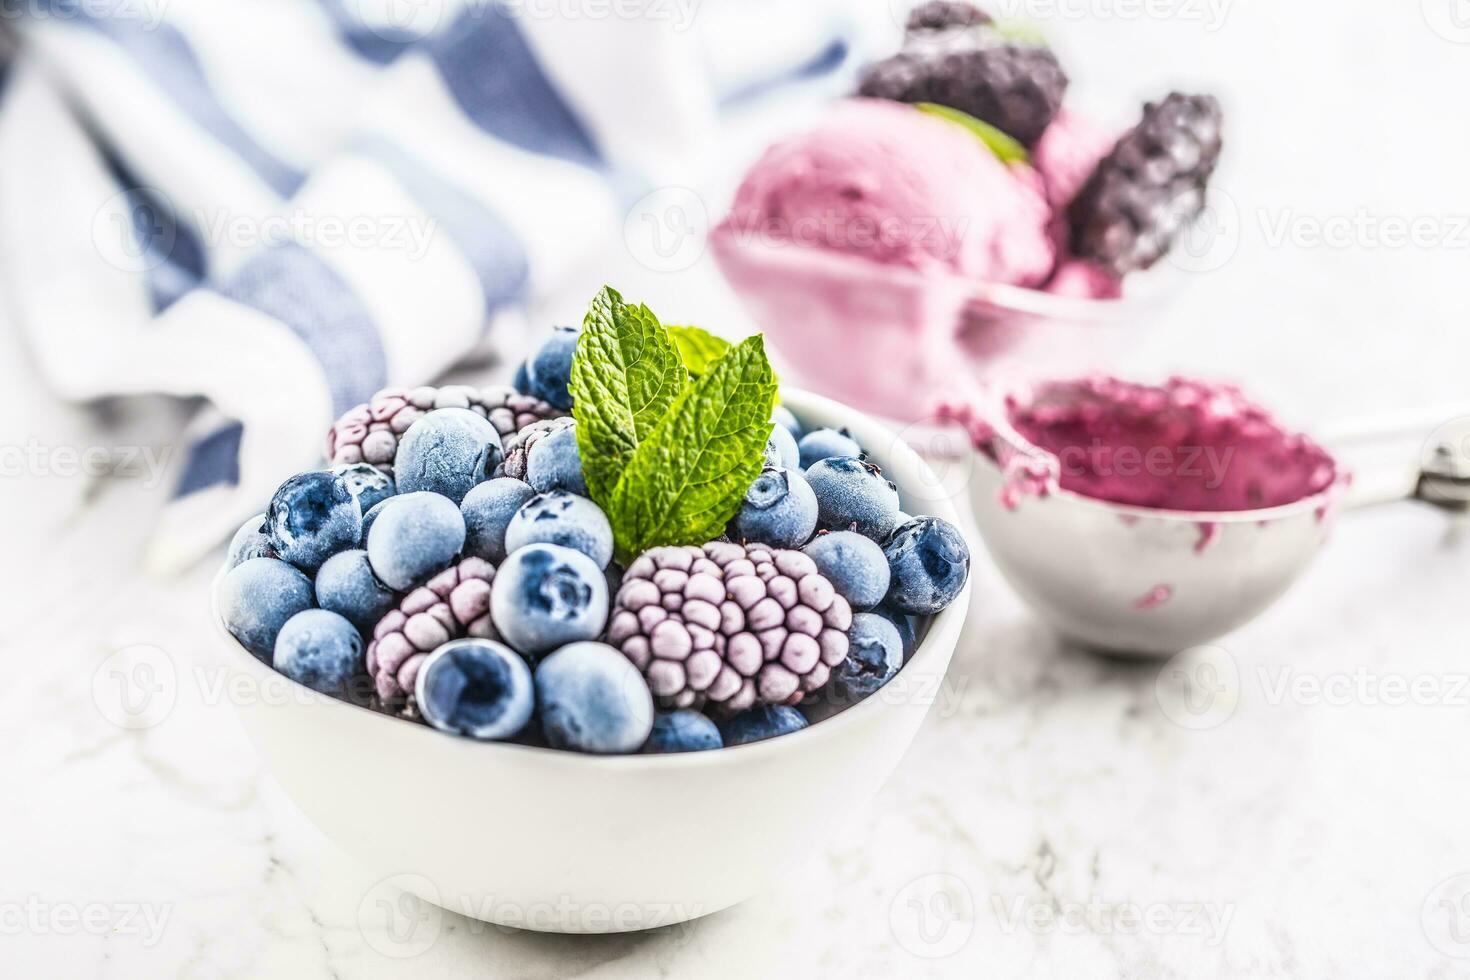 Close-up frozen blueberries and blackberries and icecream with mint leaves photo